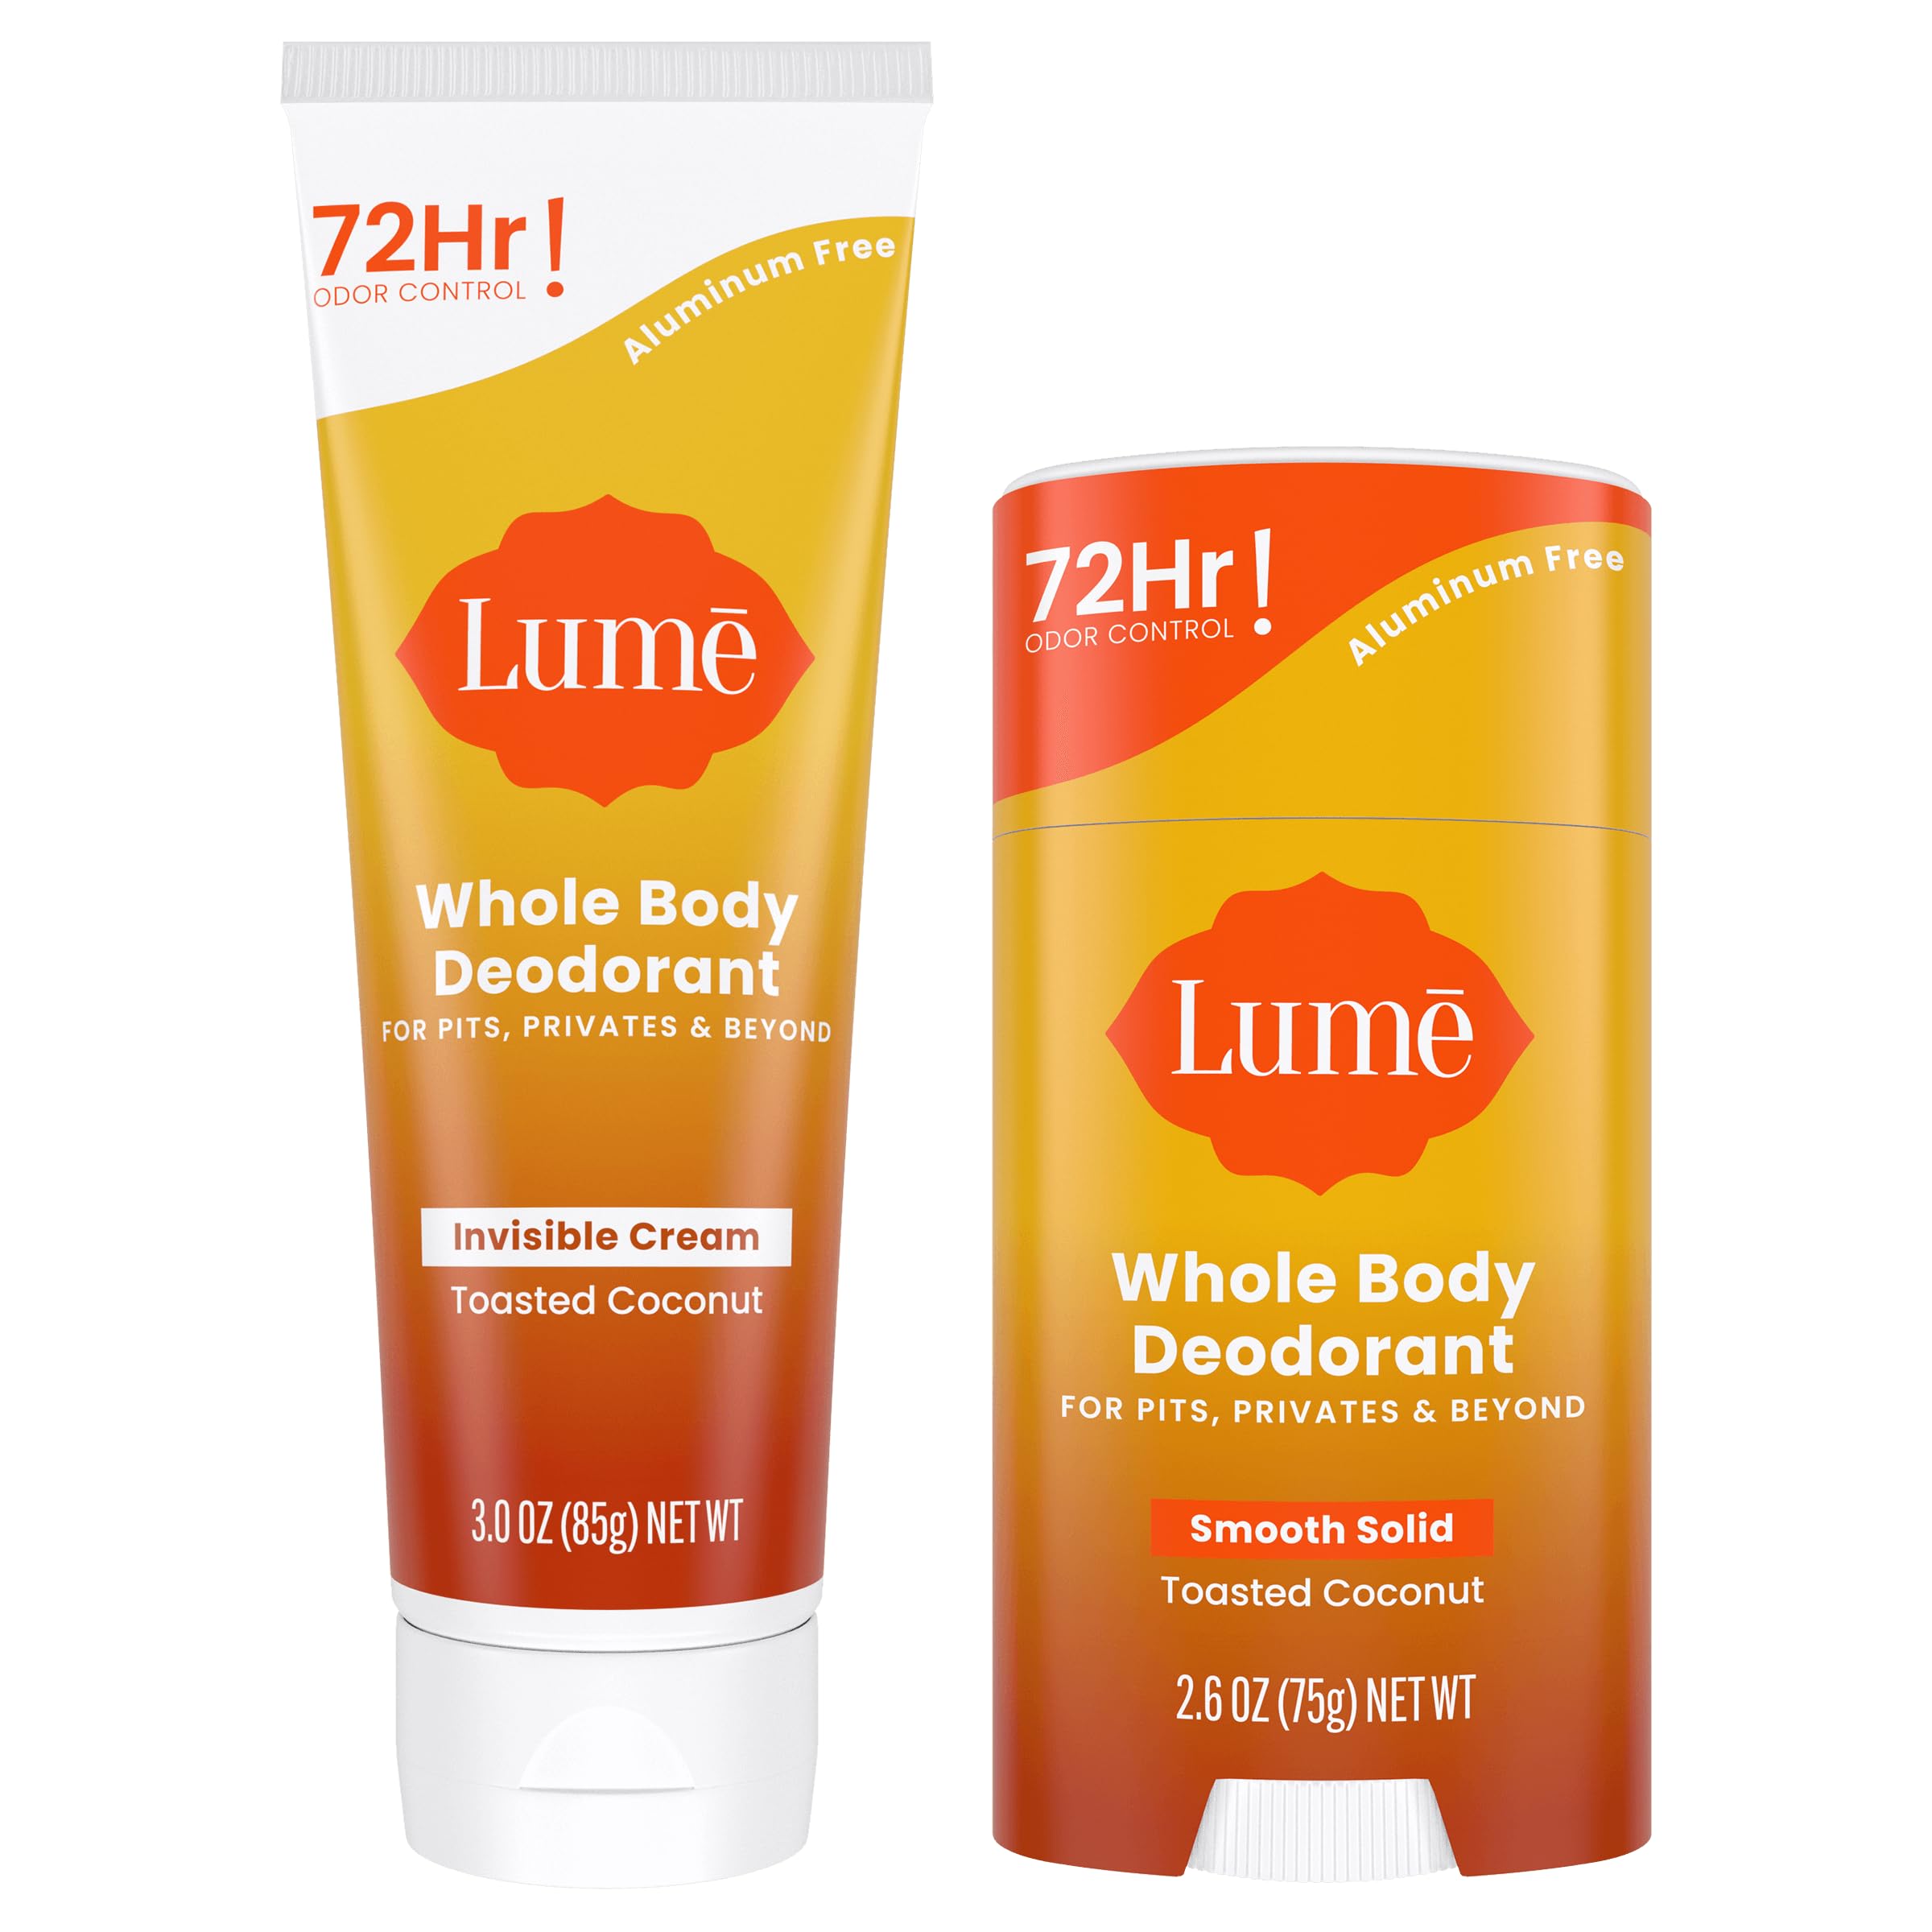 Lume Whole Body Deodorant - Invisible Cream Tube and Solid Stick - 72 Hour Odor Control - Aluminum Free, Baking Soda Free, Skin Safe - 3.0 Ounce Tube and 2.6 Ounce Solid Stick Bundle (Toasted Coconut)